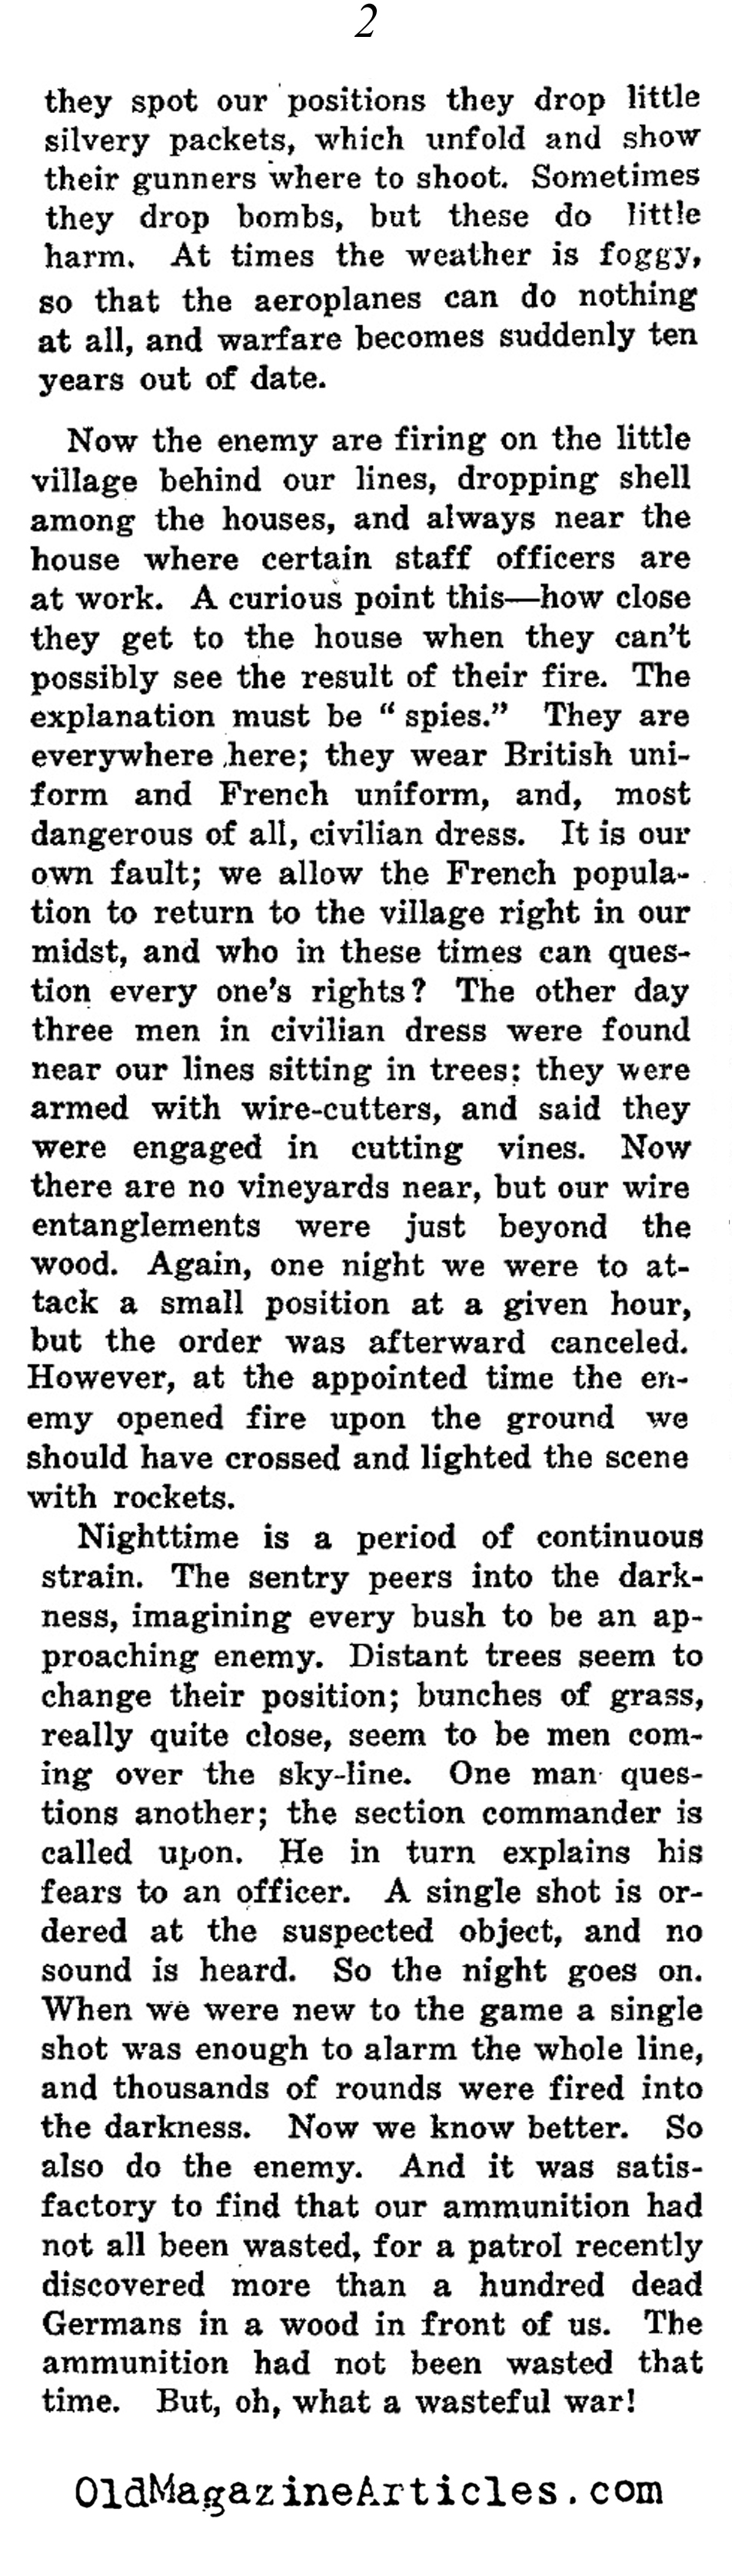 Living the Trench War (NY  Times, 1915)